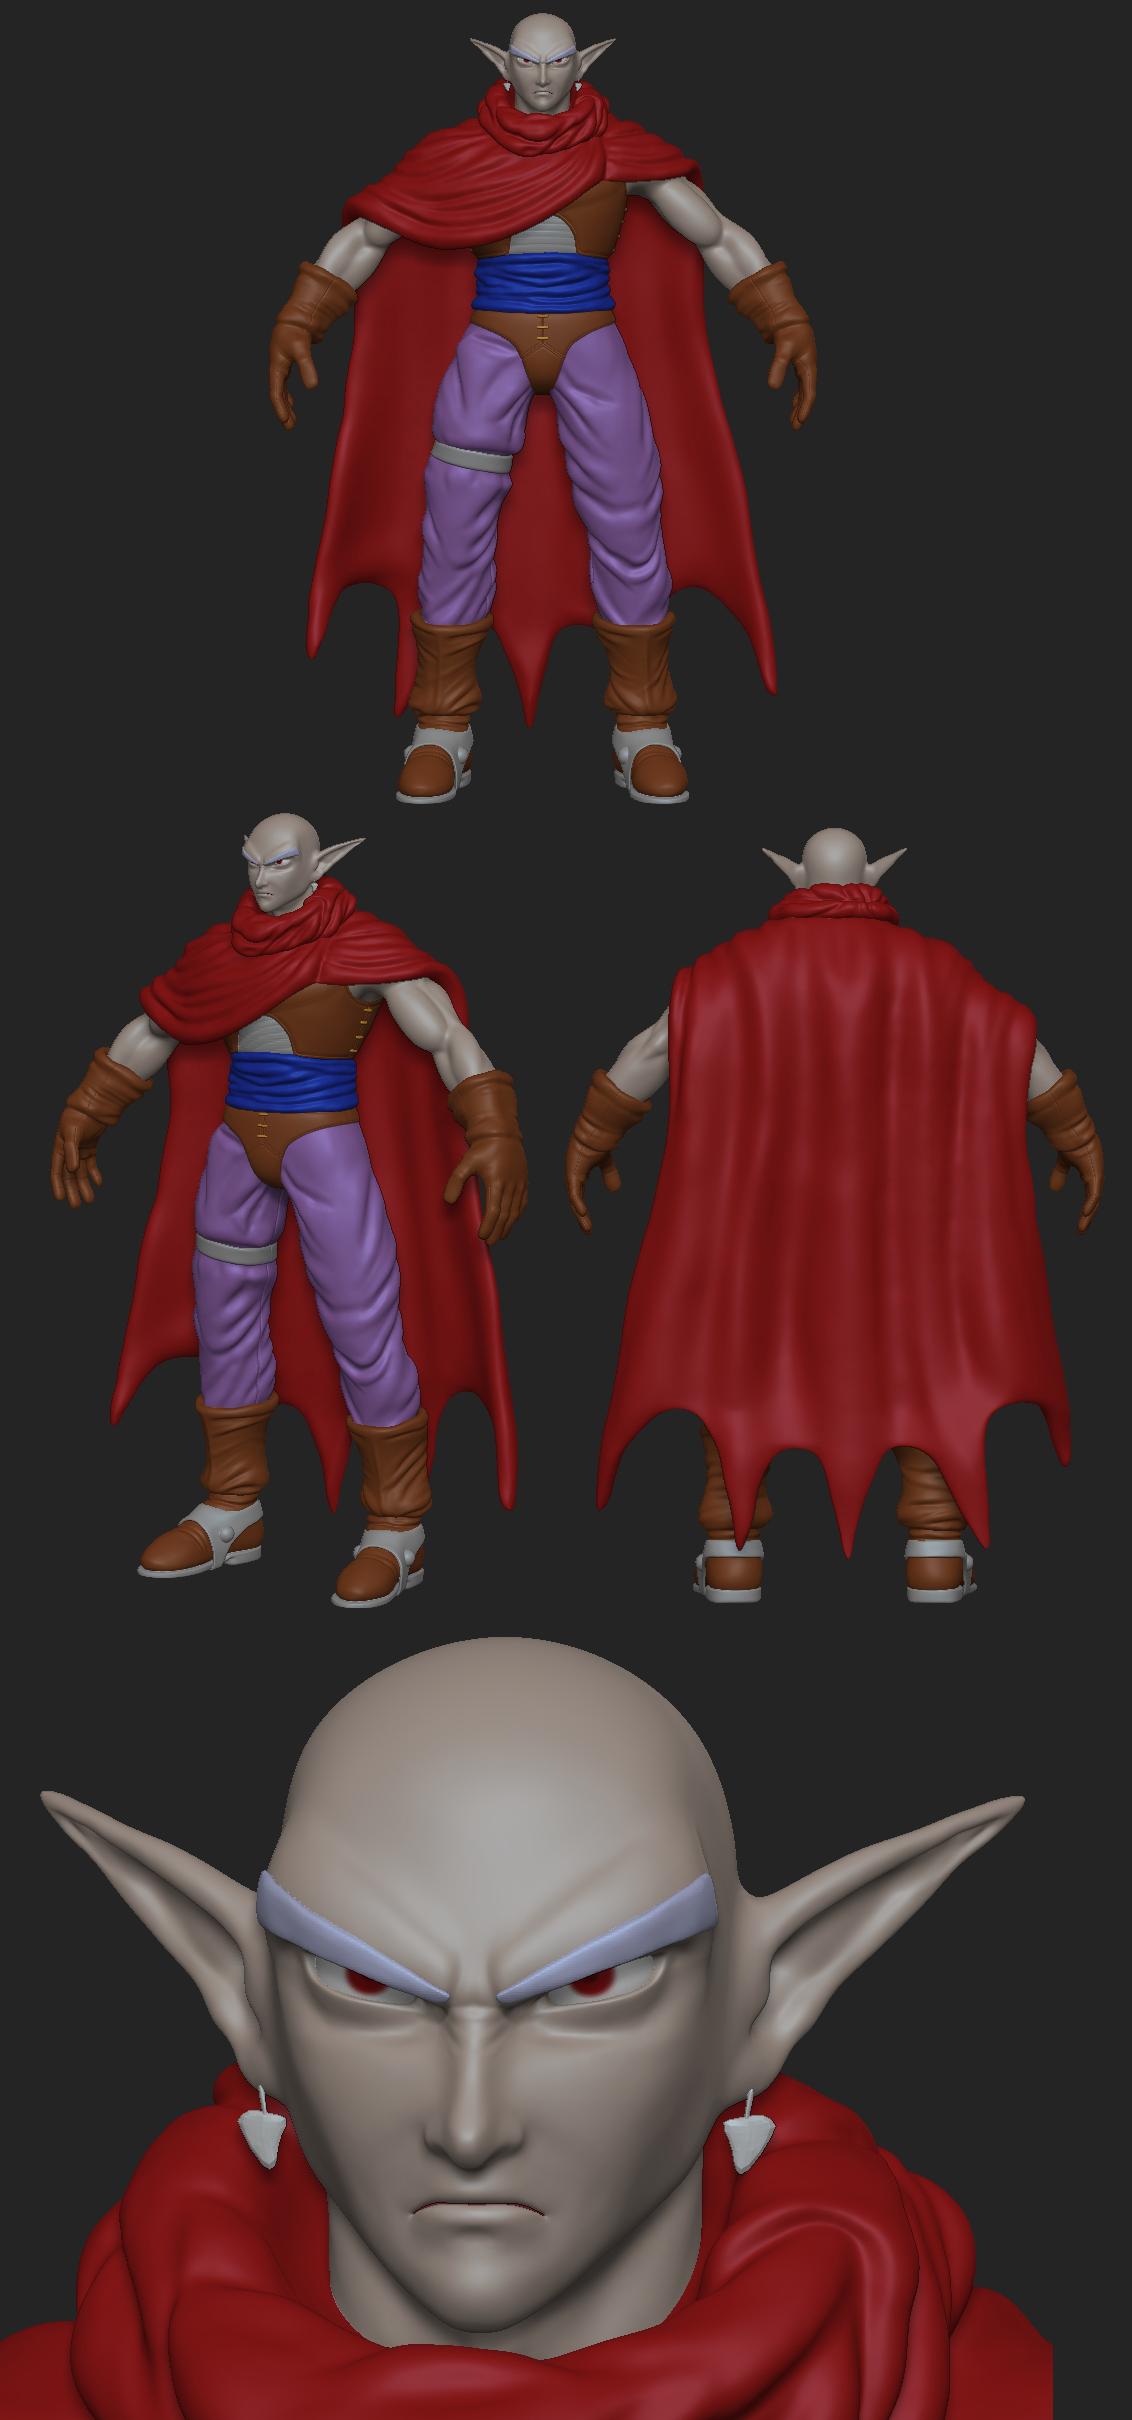 magus_wip04_by_theartistictiger-d9byfin.jpg